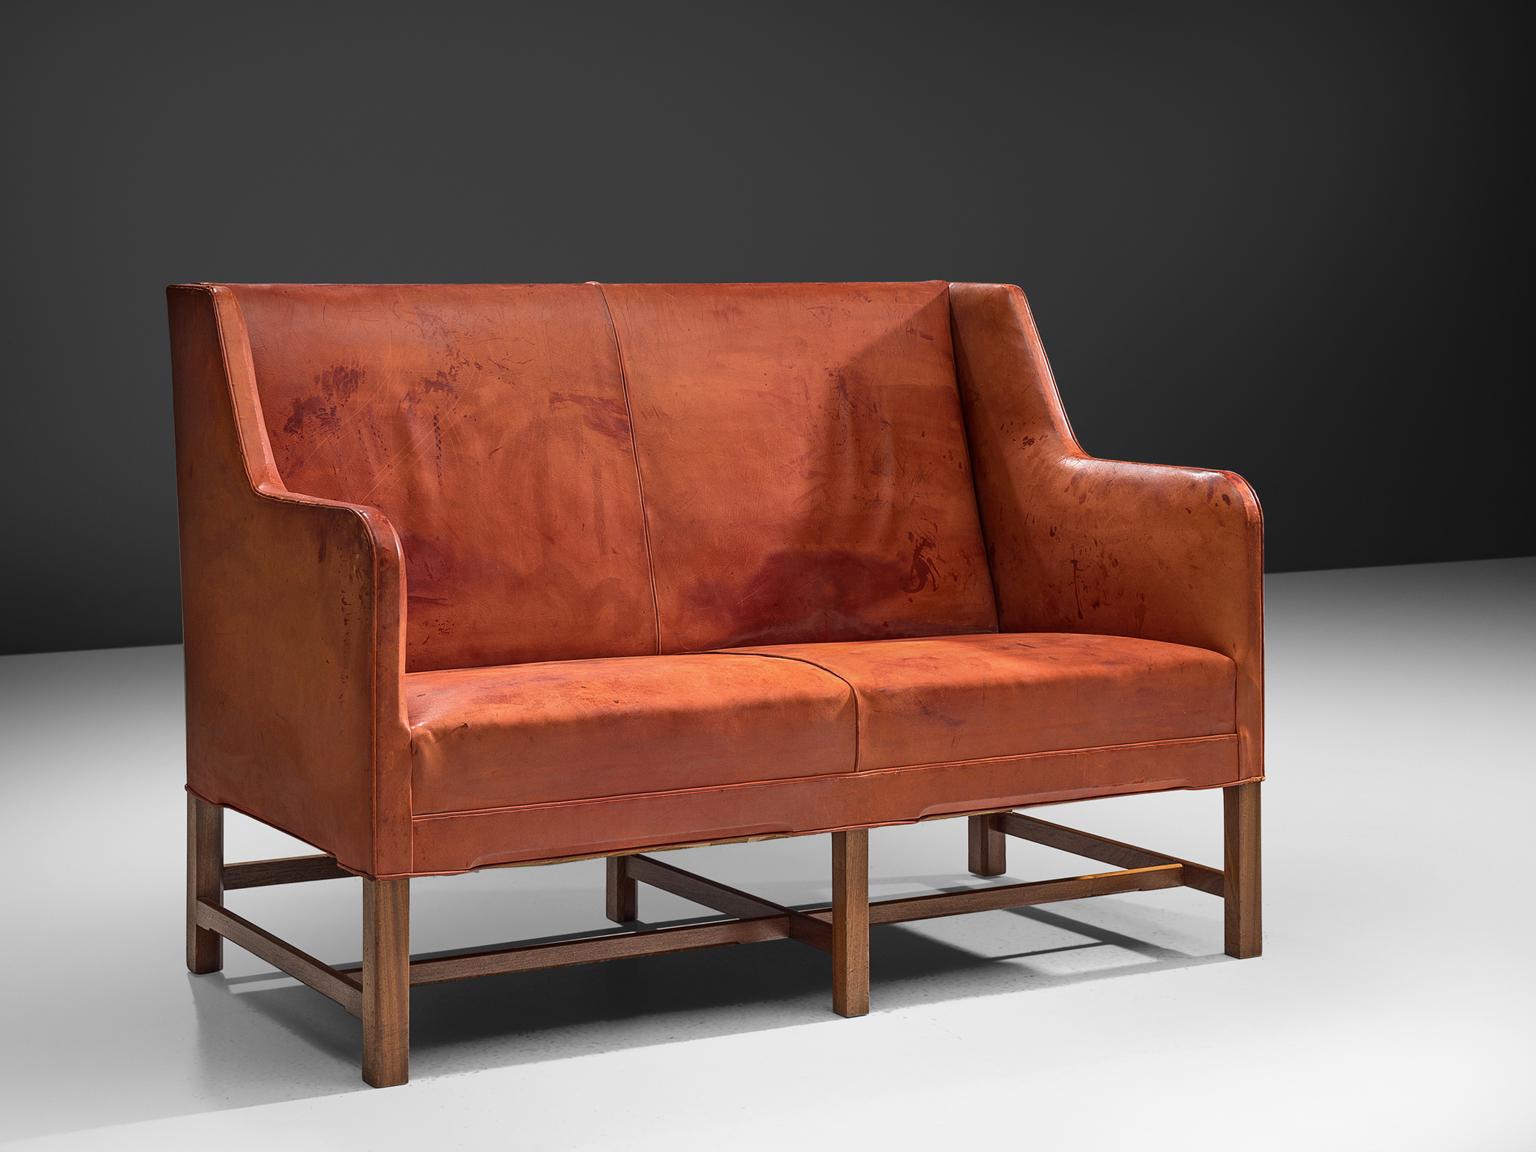 Kaare Klint for Rud Rasmussen two-seat settee, in red cognac leather and teak legs, Denmark, 1930s.

Classic and elegant Scandinavian custom made two-seat settee by Kaare Klint for manufacturer Rud Rasmussen. The piece is upholstered with